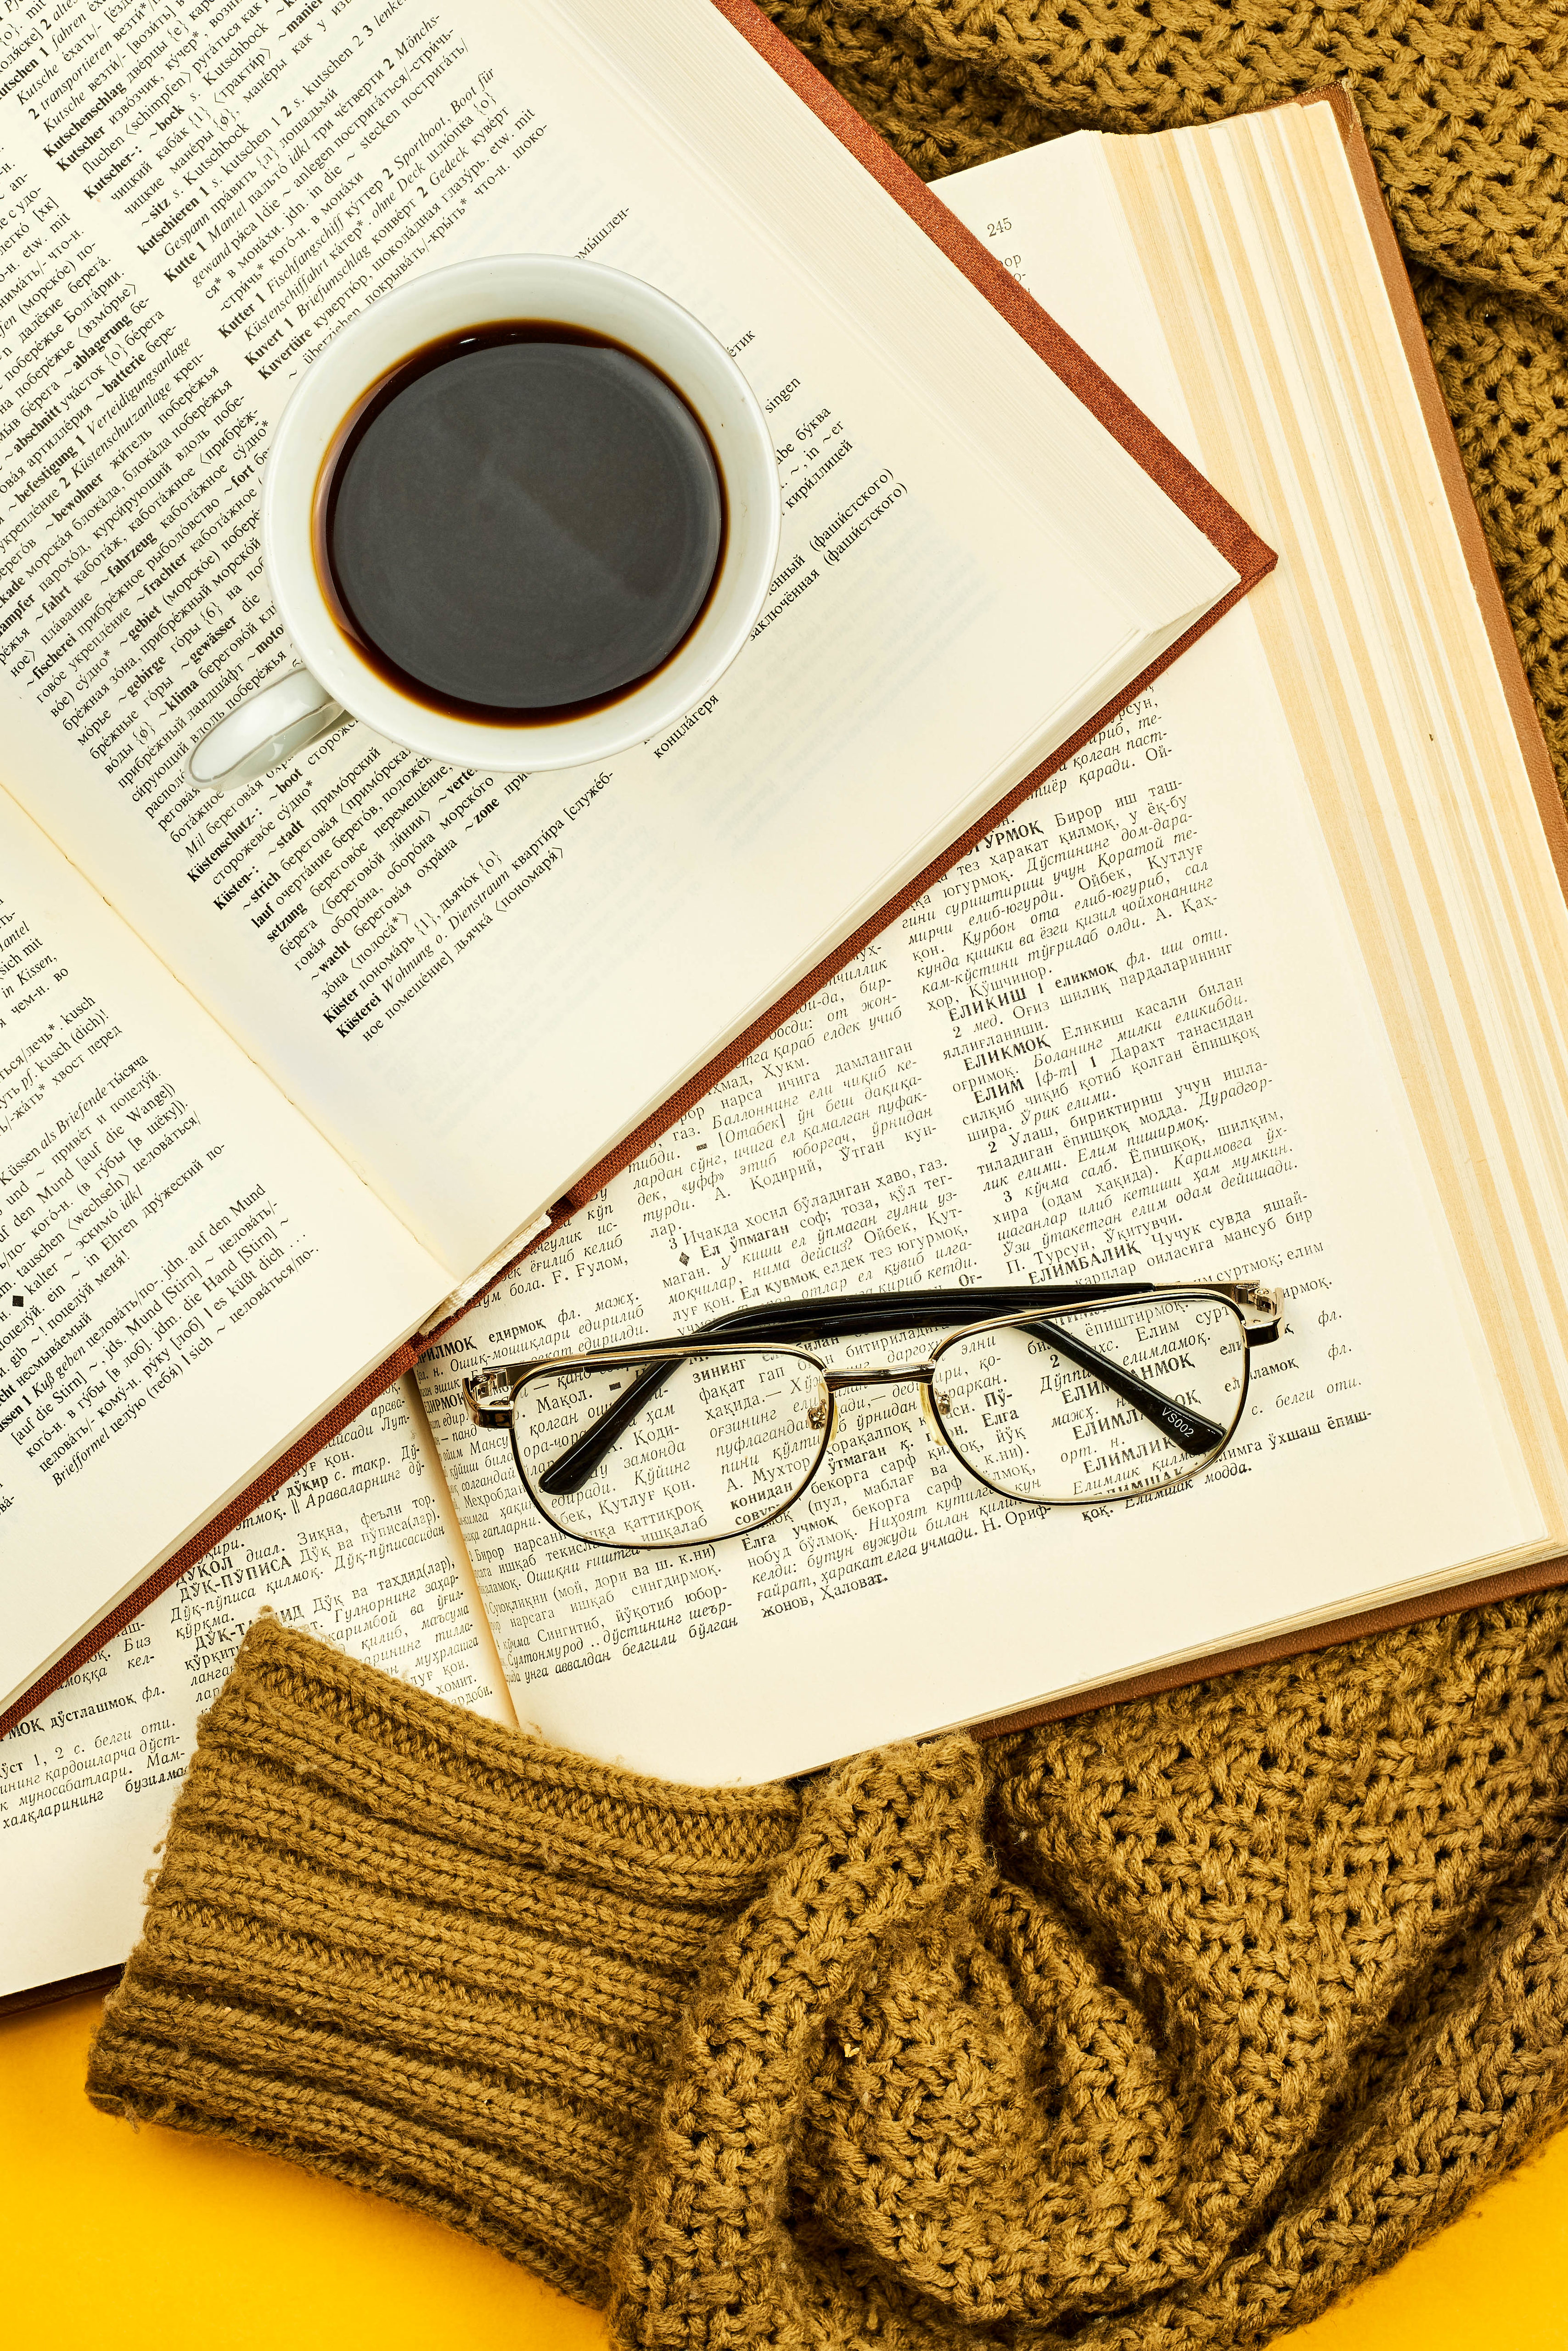 coffee, miscellanea, miscellaneous, text, book, glasses, spectacles, sweater